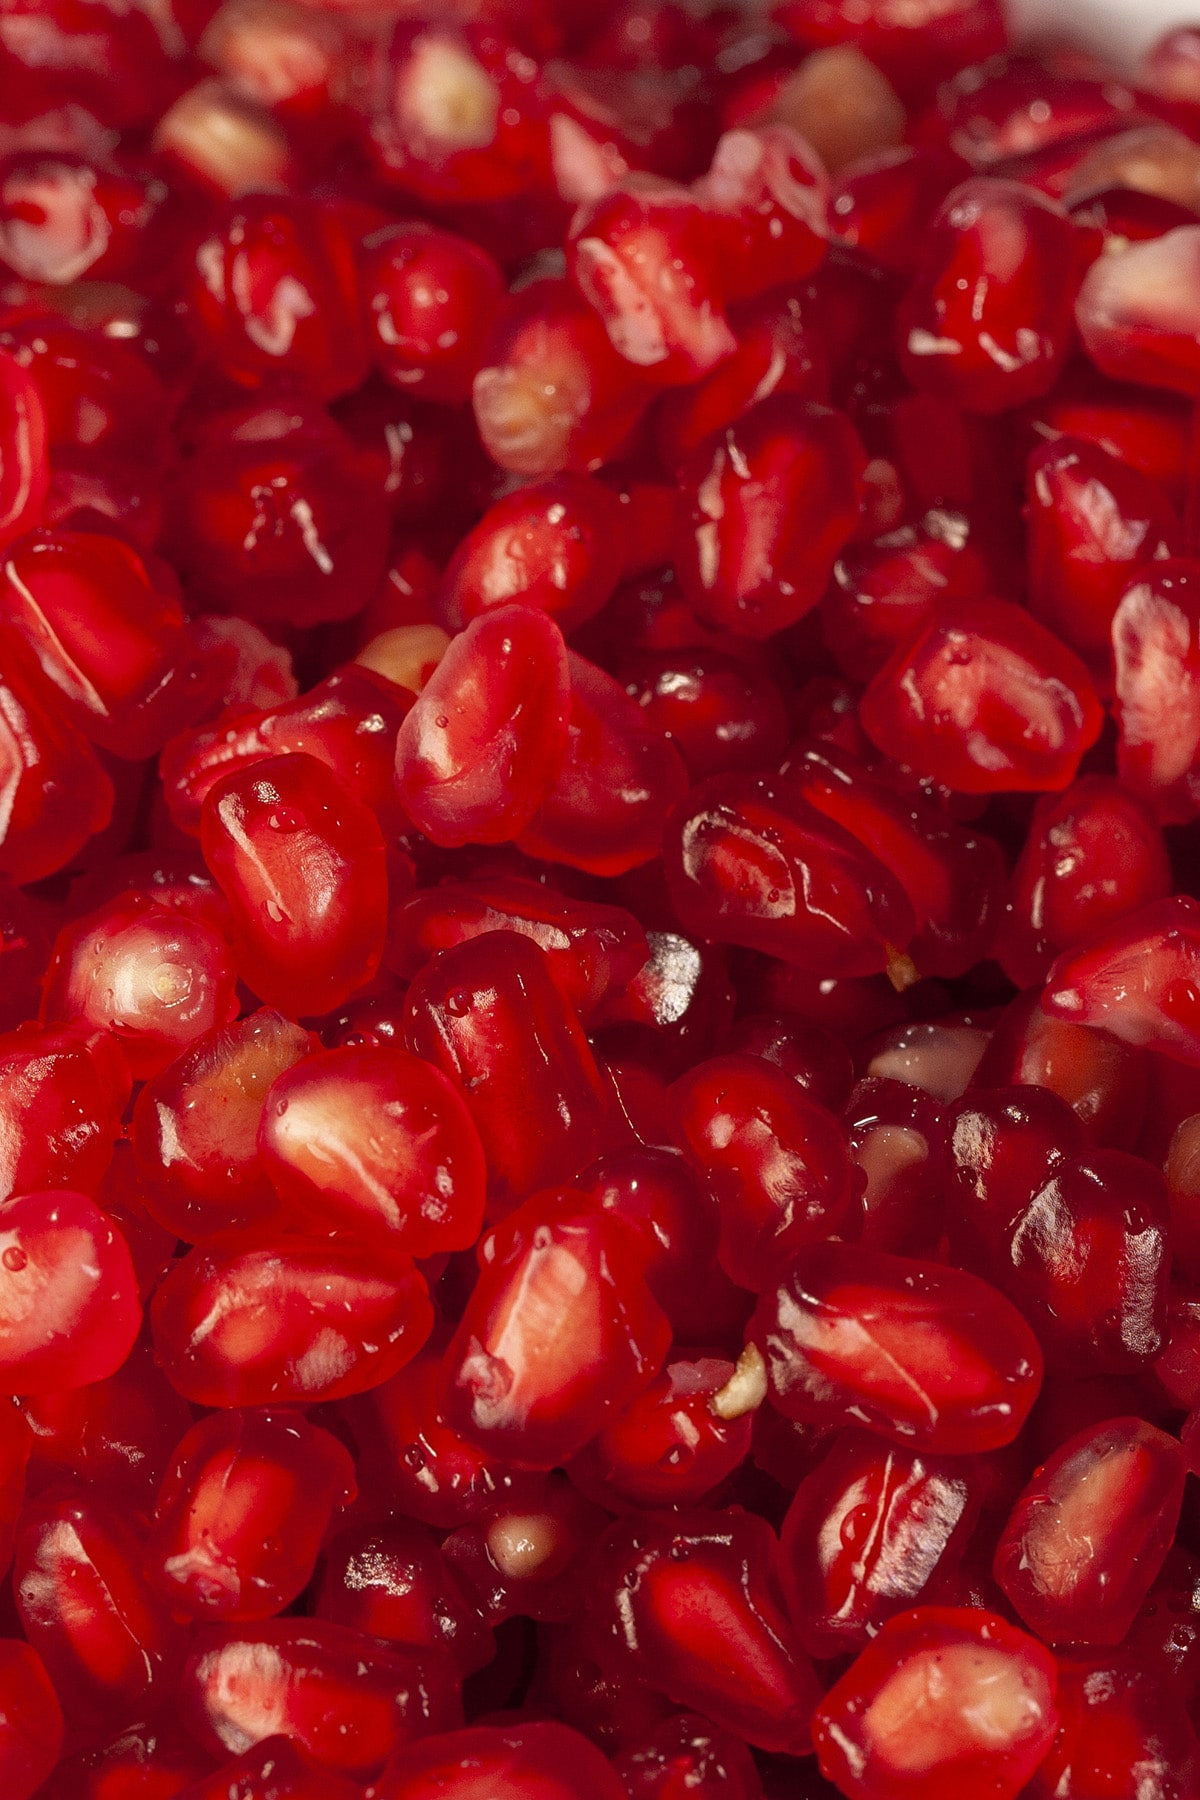 A close up view of a bowl of pomegranate arils.